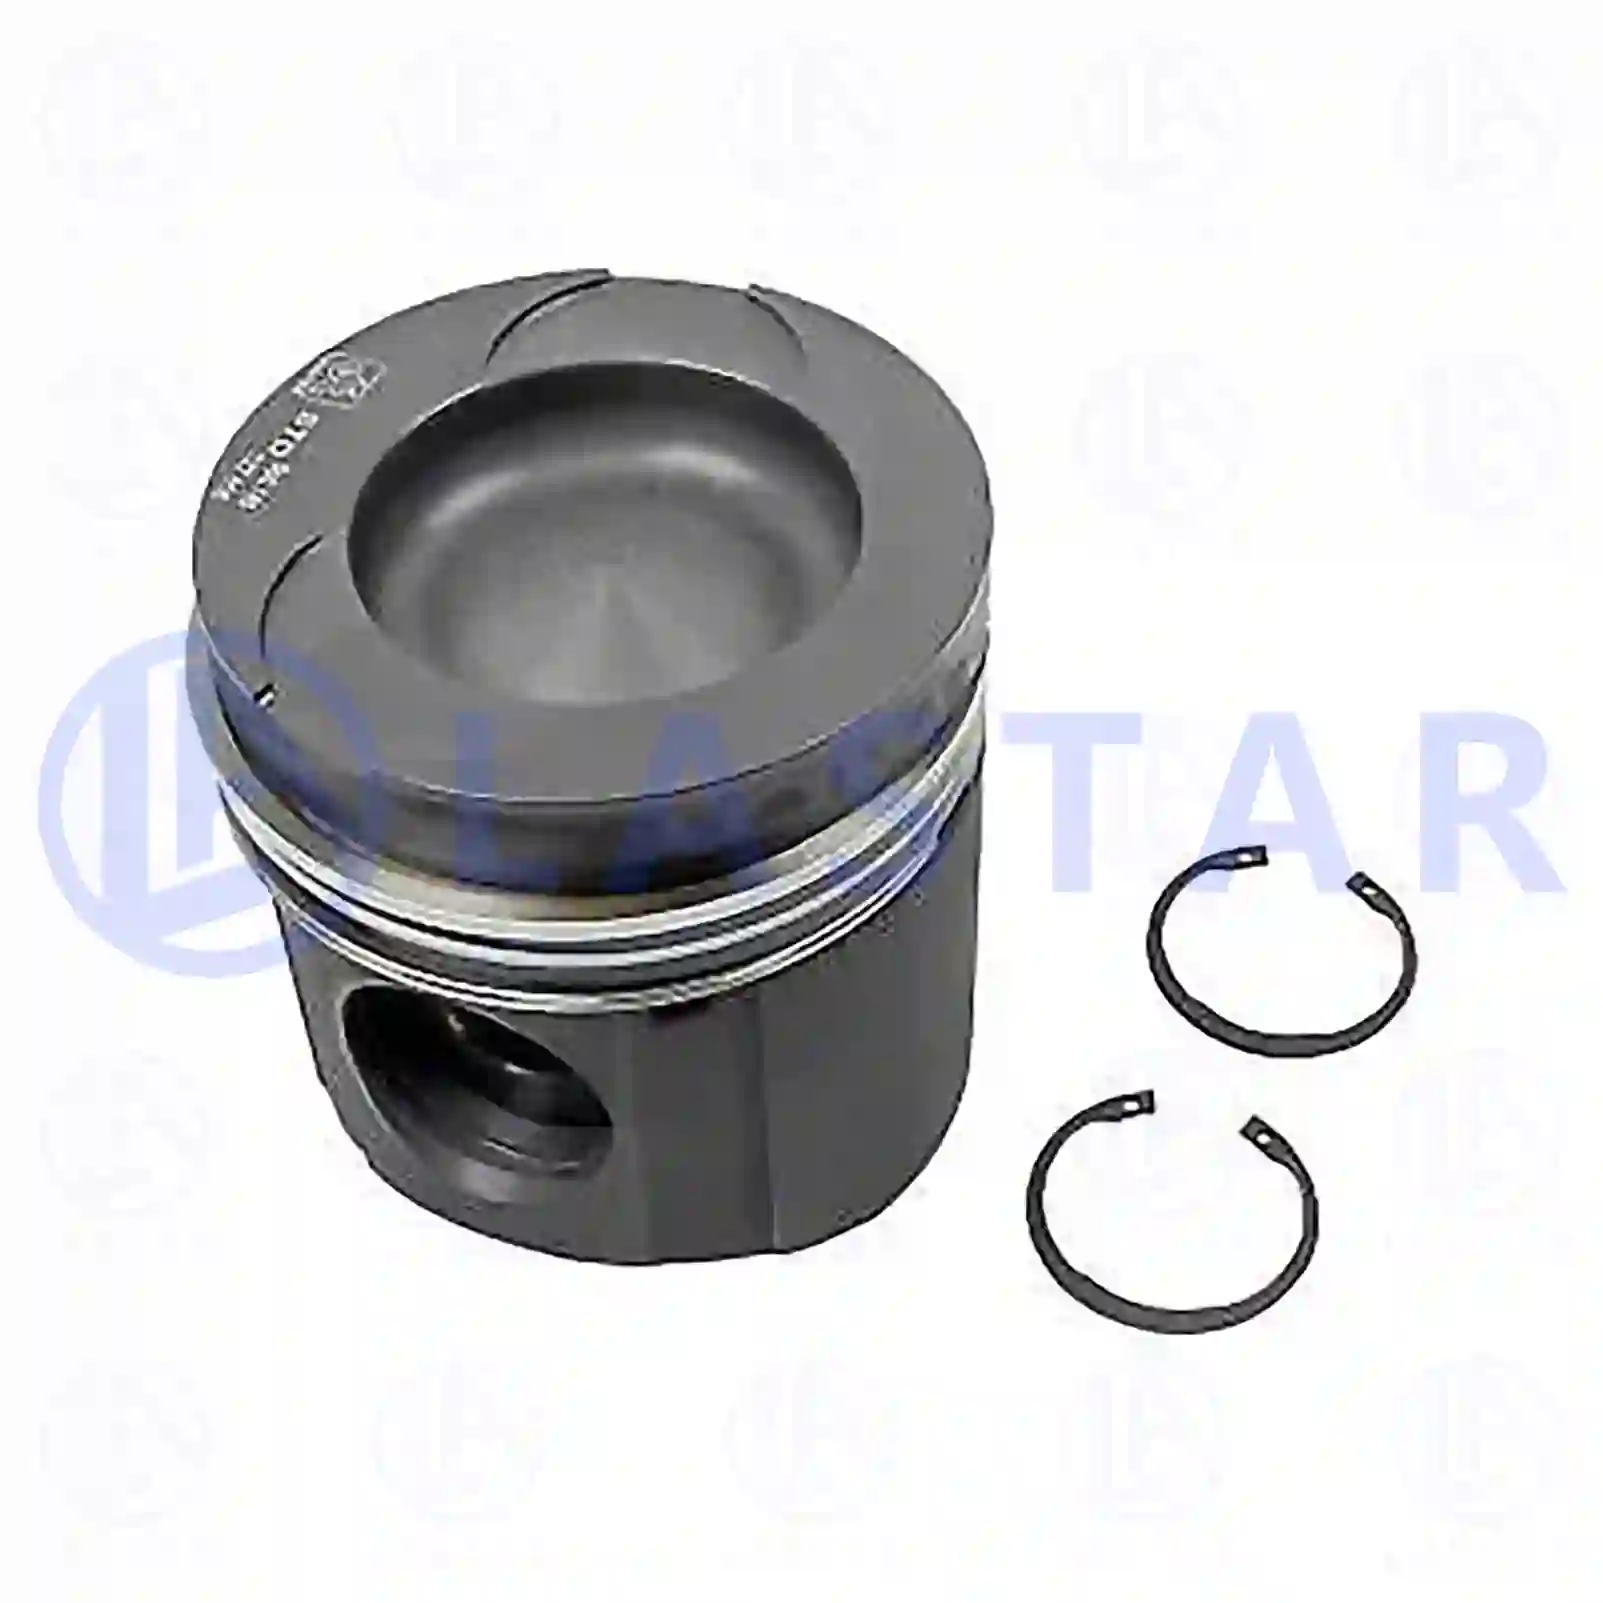 Piston, complete with rings, 77700705, 51025117105, 51025117109, 51025117261, 51025117262, 51025117377 ||  77700705 Lastar Spare Part | Truck Spare Parts, Auotomotive Spare Parts Piston, complete with rings, 77700705, 51025117105, 51025117109, 51025117261, 51025117262, 51025117377 ||  77700705 Lastar Spare Part | Truck Spare Parts, Auotomotive Spare Parts